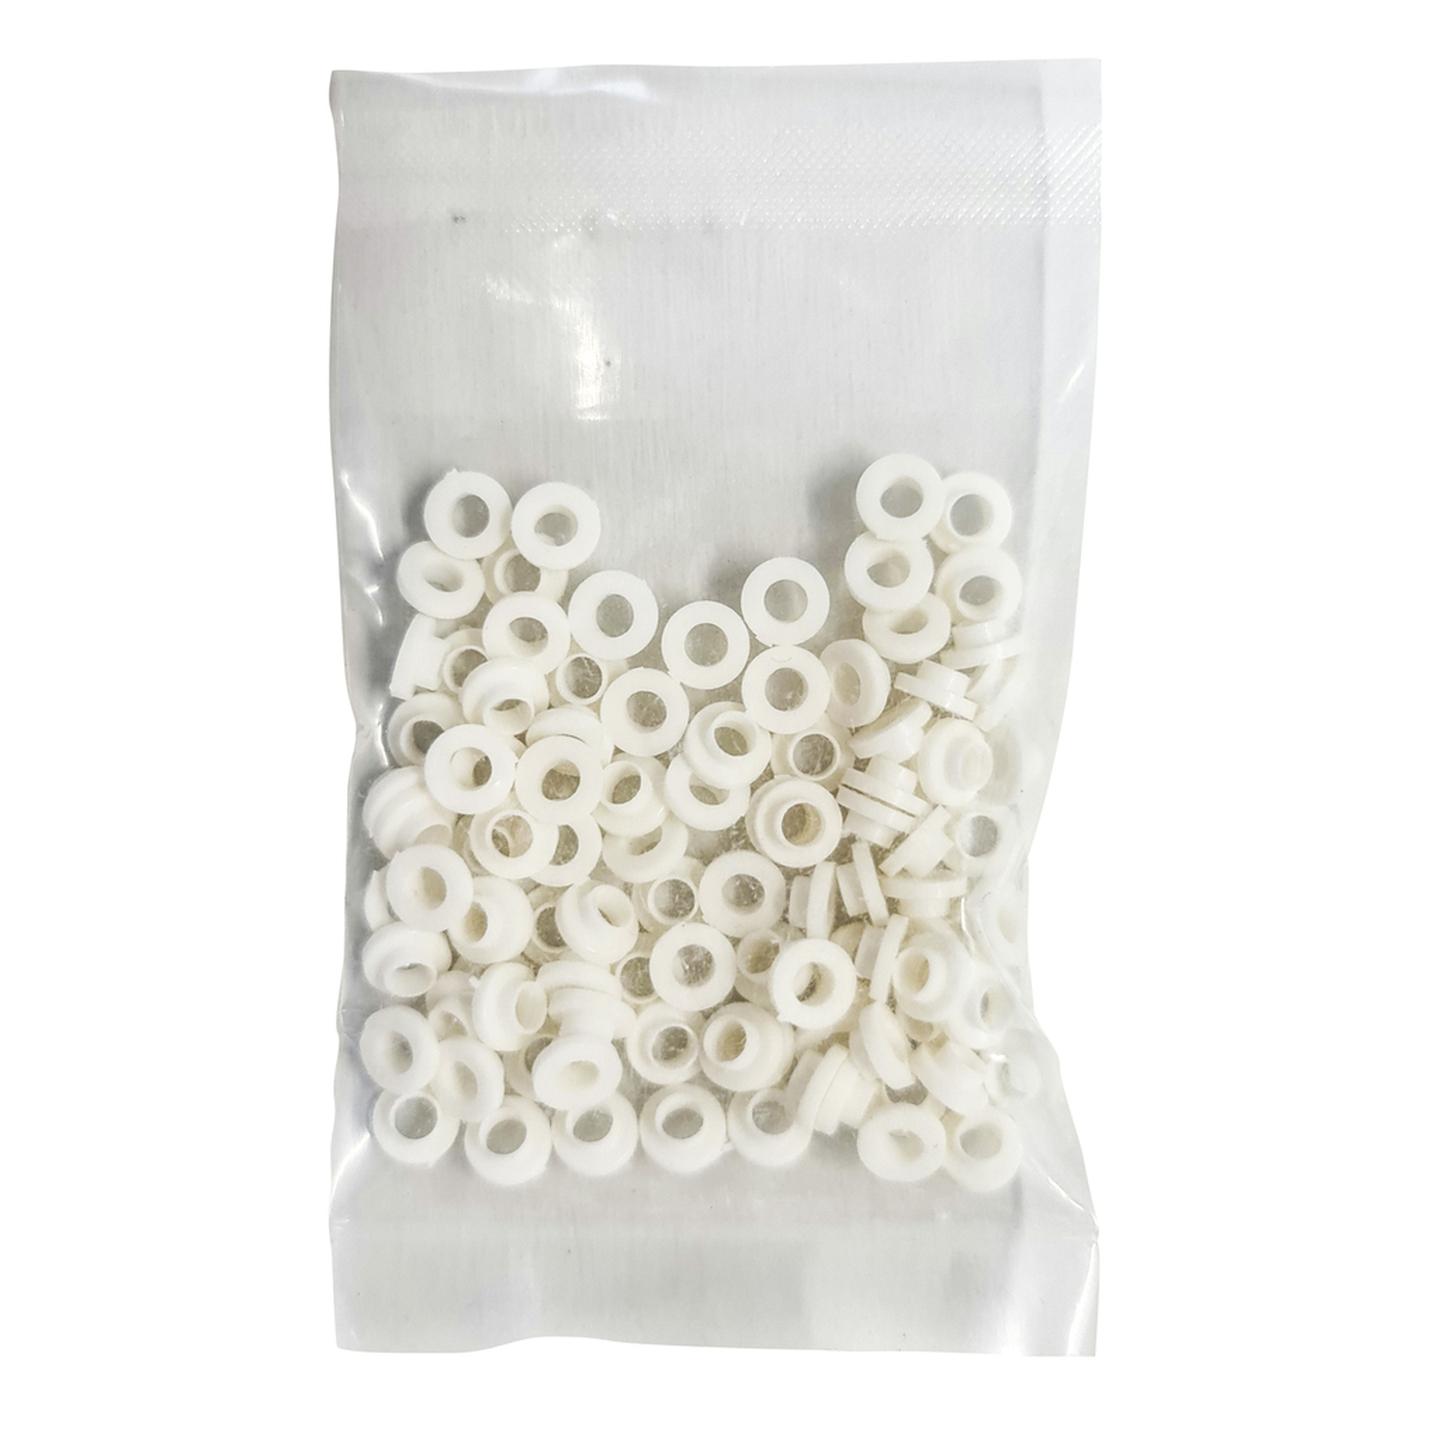 TO-220 Bushes - Pack of 100